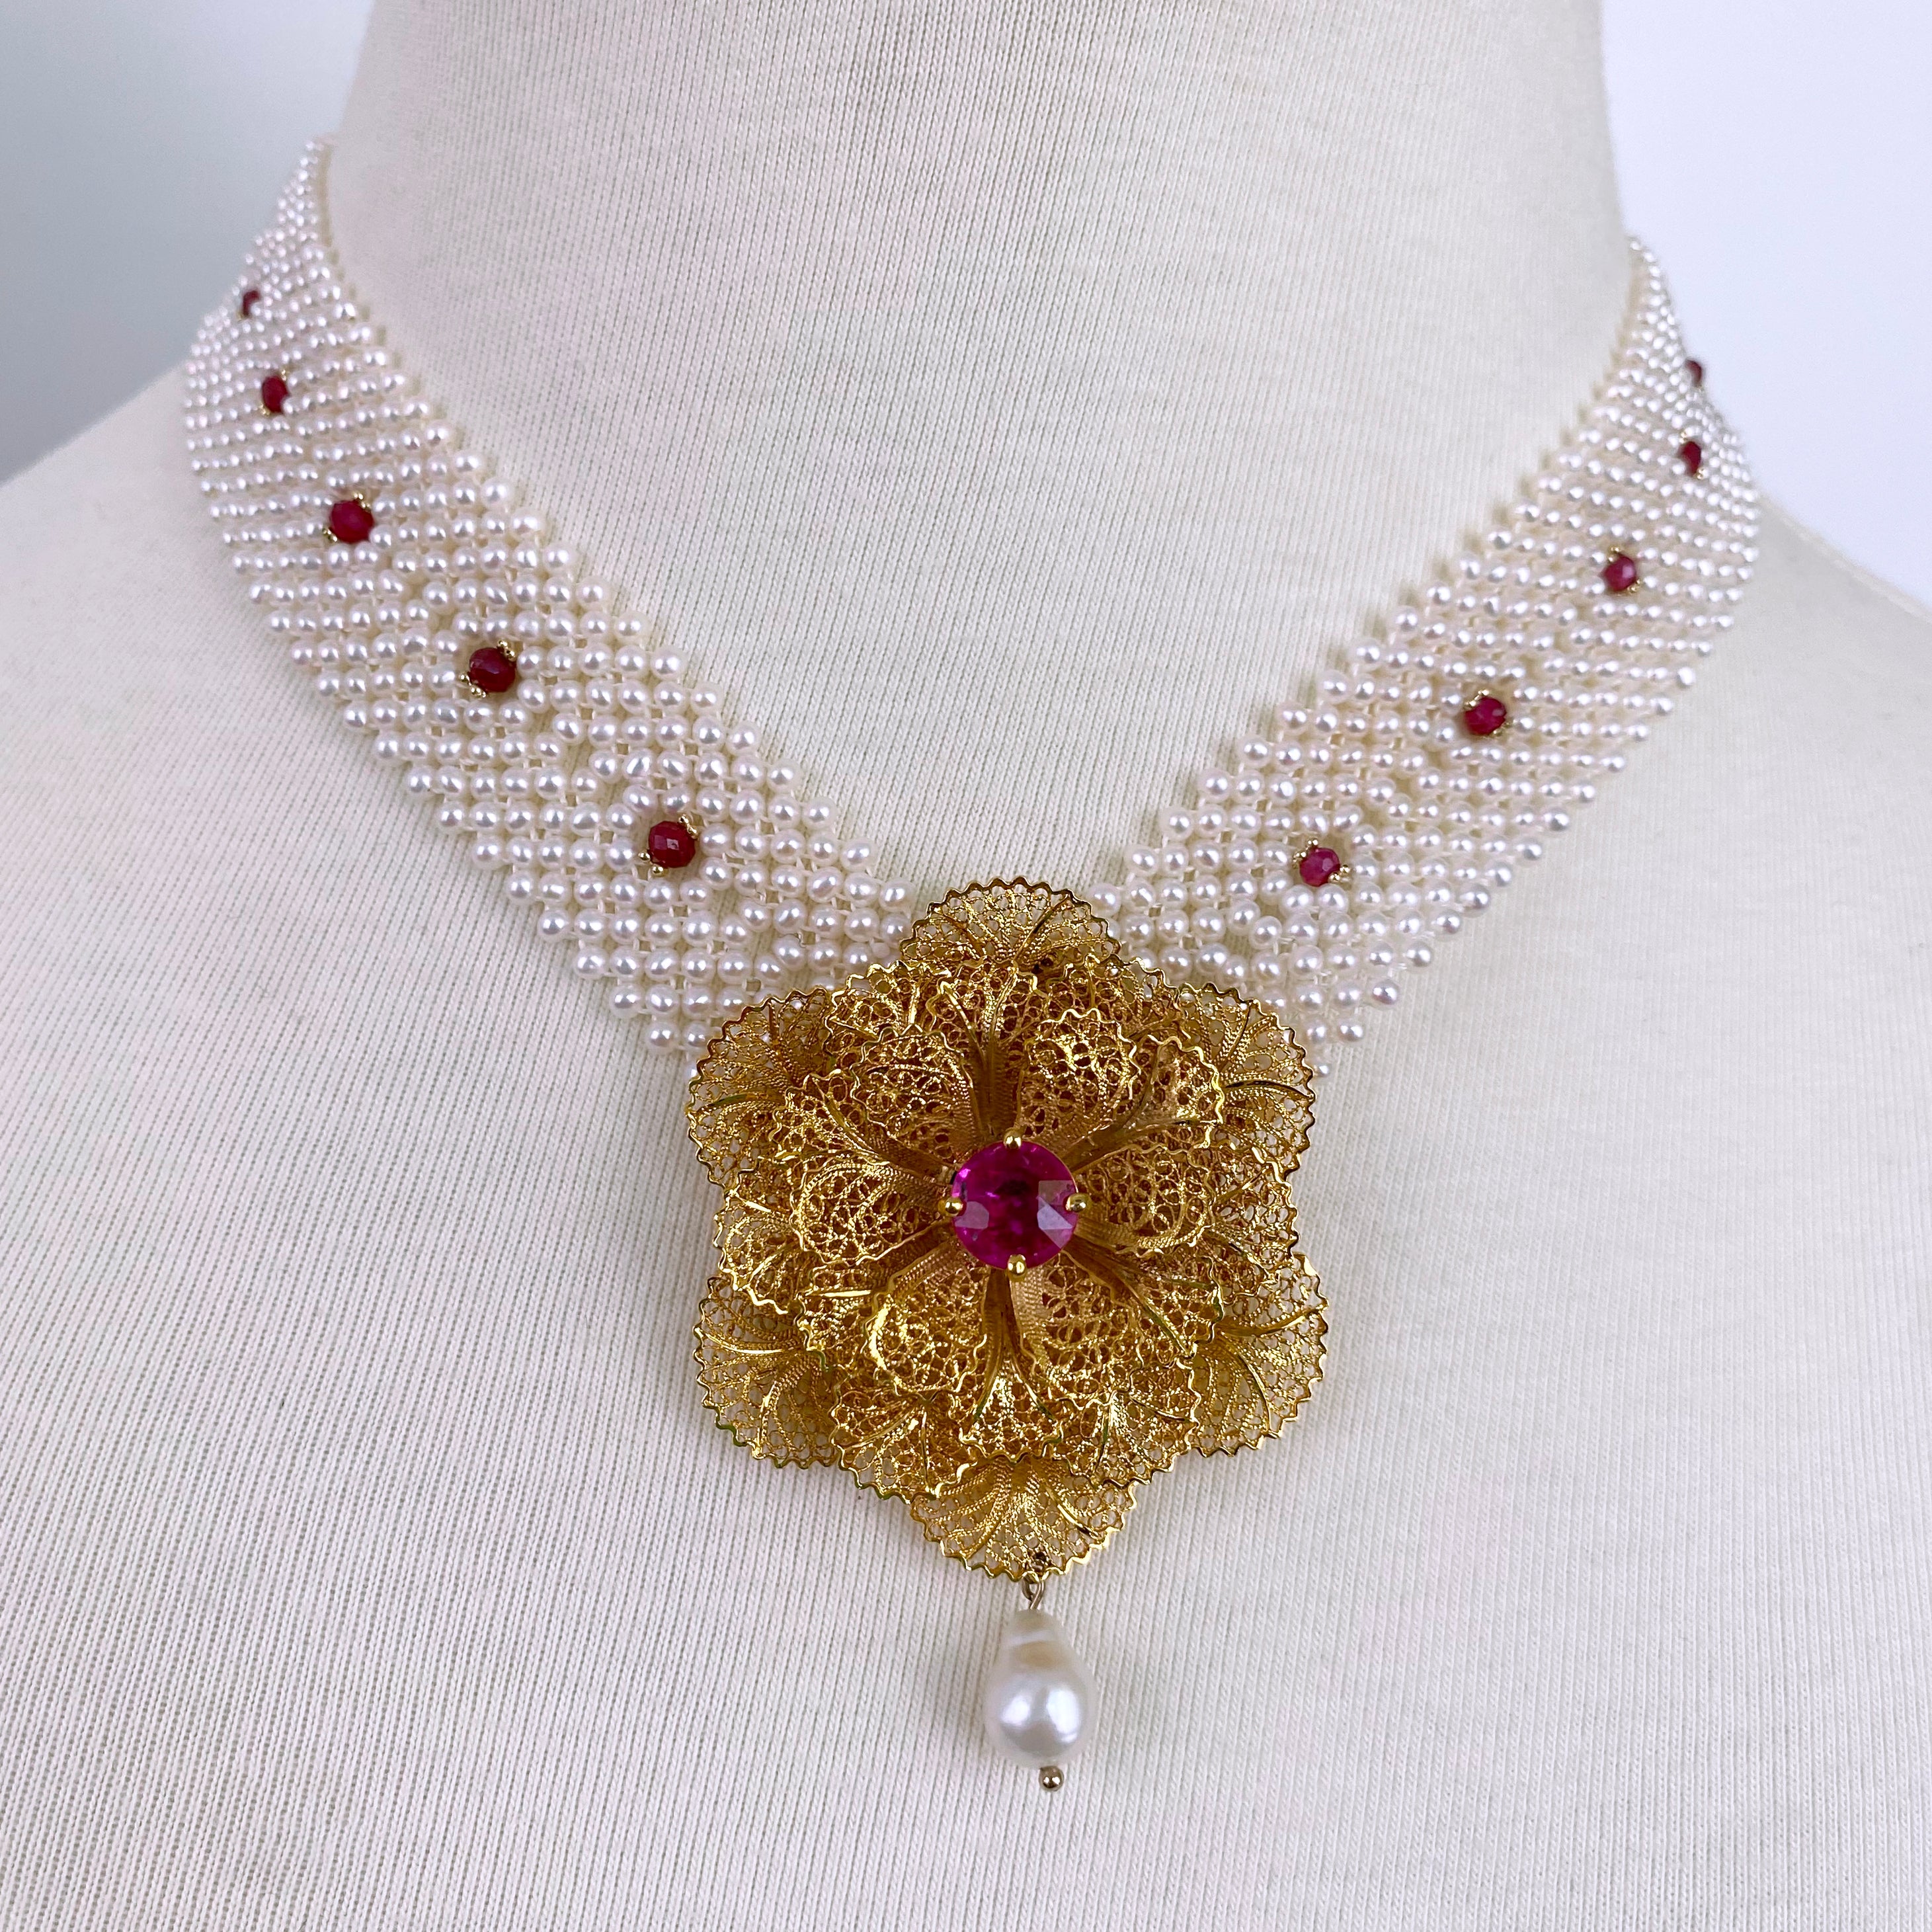 One of A Kind Necklace by Marina J.
This piece was made with an Antique Floral brooch, reworked as the centerpiece. The 18k Yellow Gold Plated - Silver Floral brooch holds beautiful Filigree details, Pearl drop and a stunning 2 karat faceted Pink